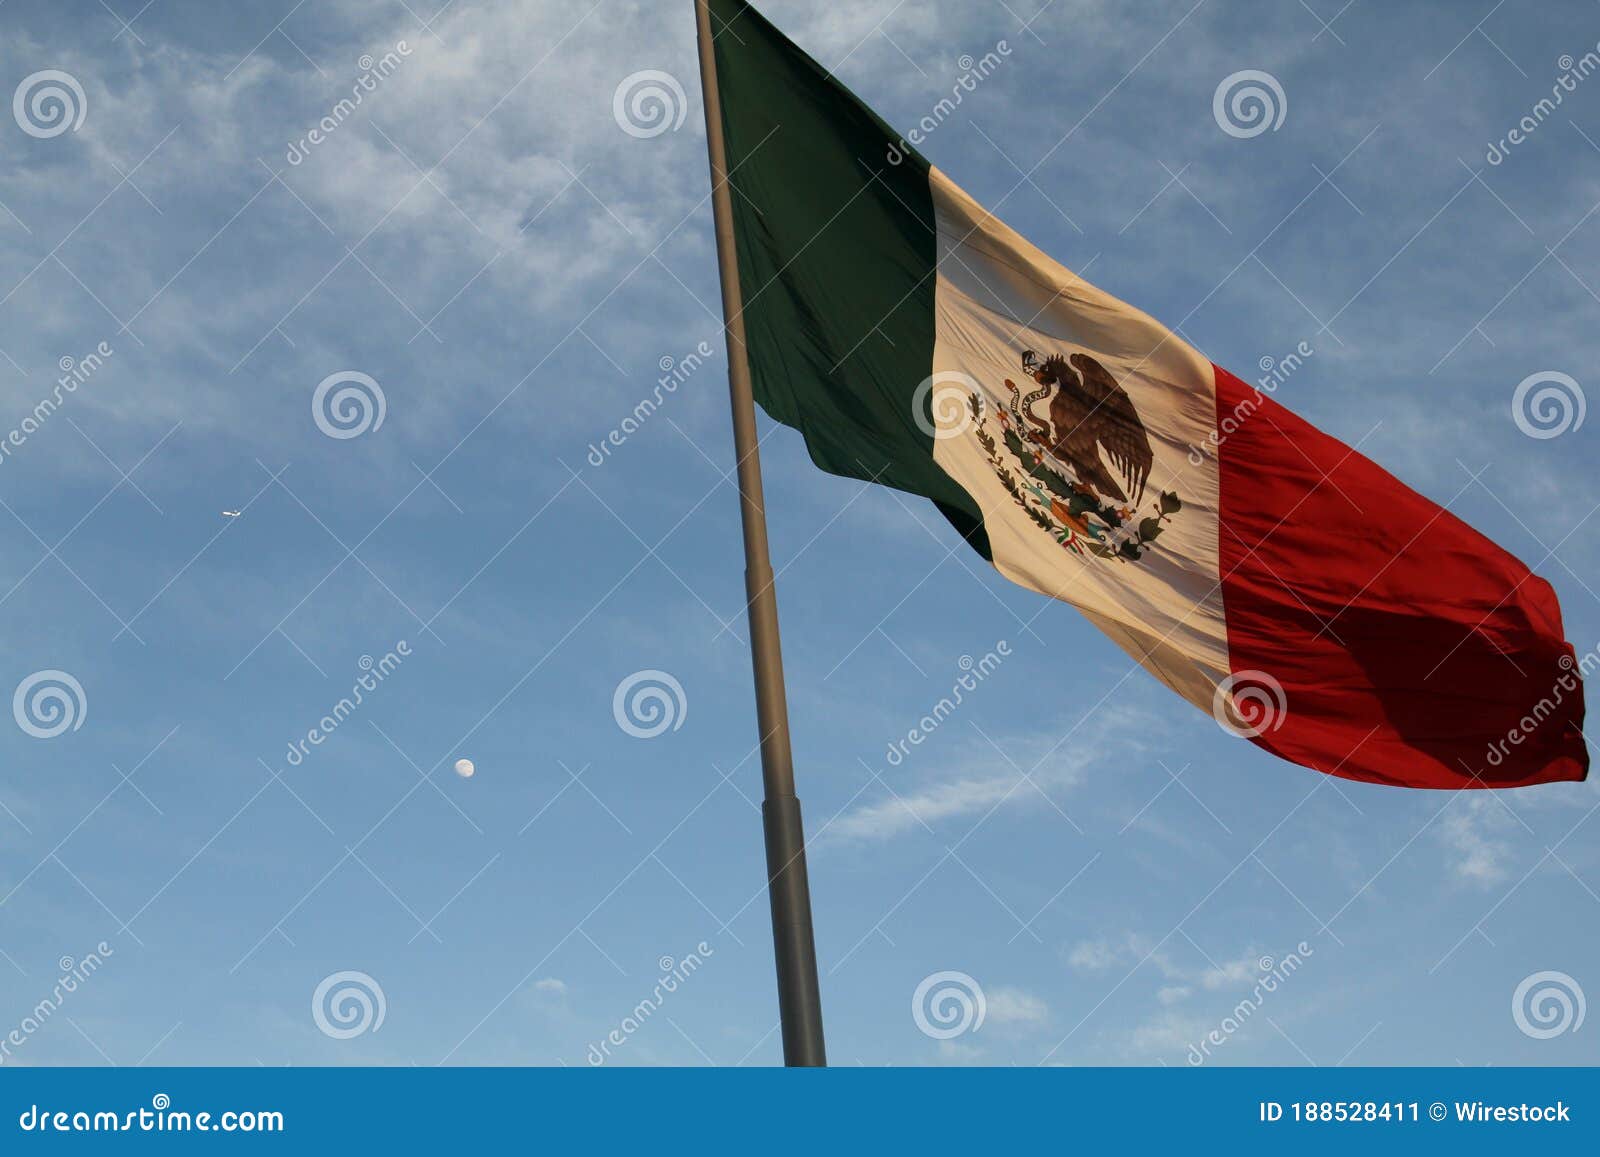 the large mexican flag in the zocalo, mexico city